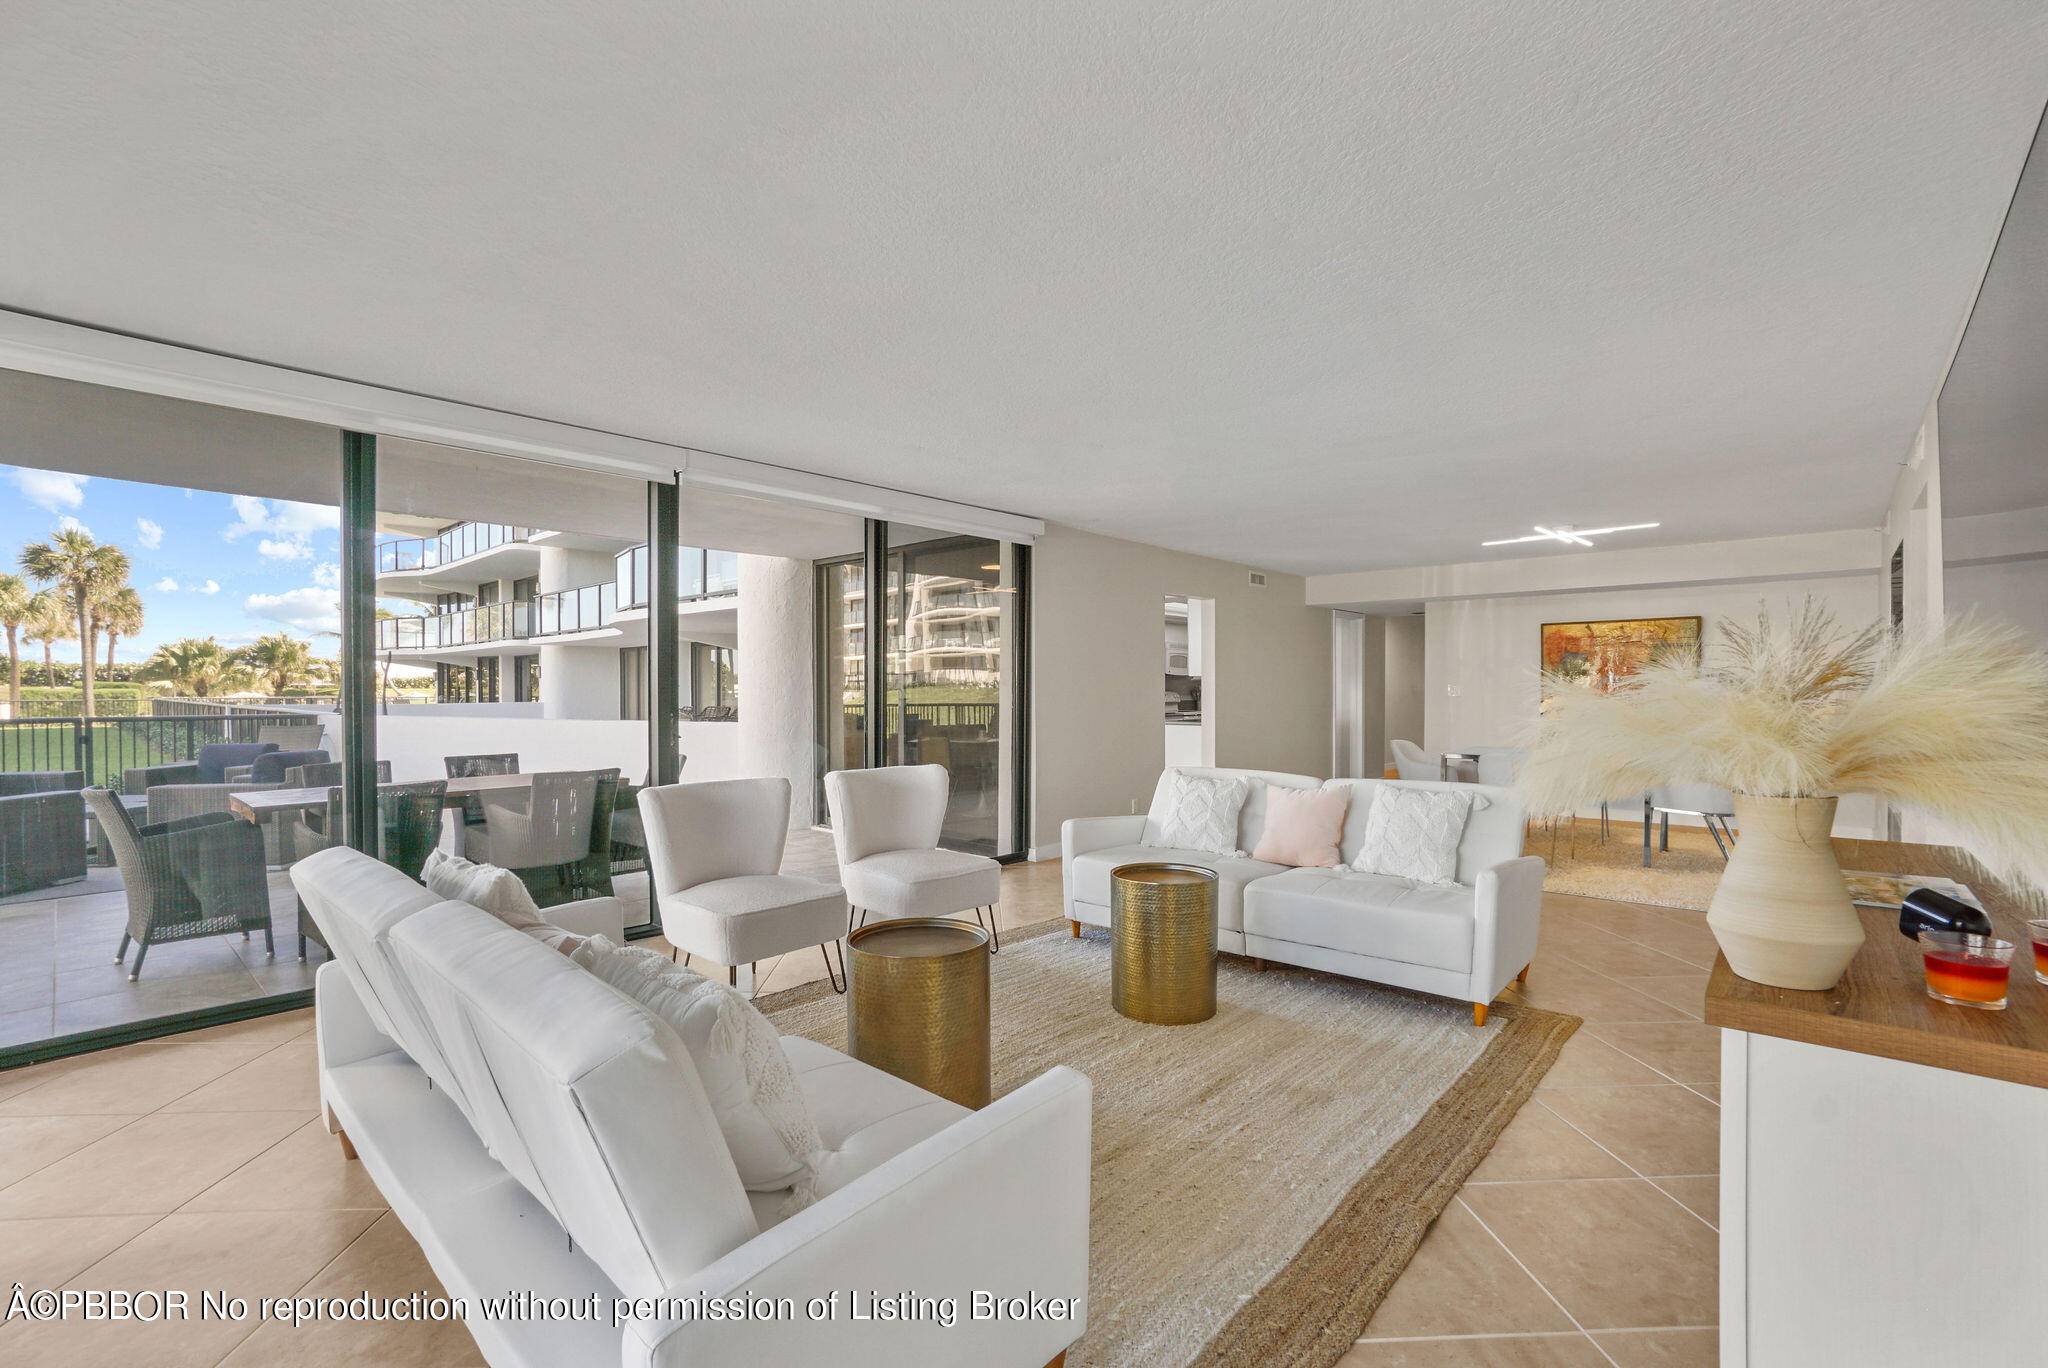 Contemporary 2 Bed 2 Bath Lanai Apartment with Designer Furnishings and Expansive and Spacious Terraces.